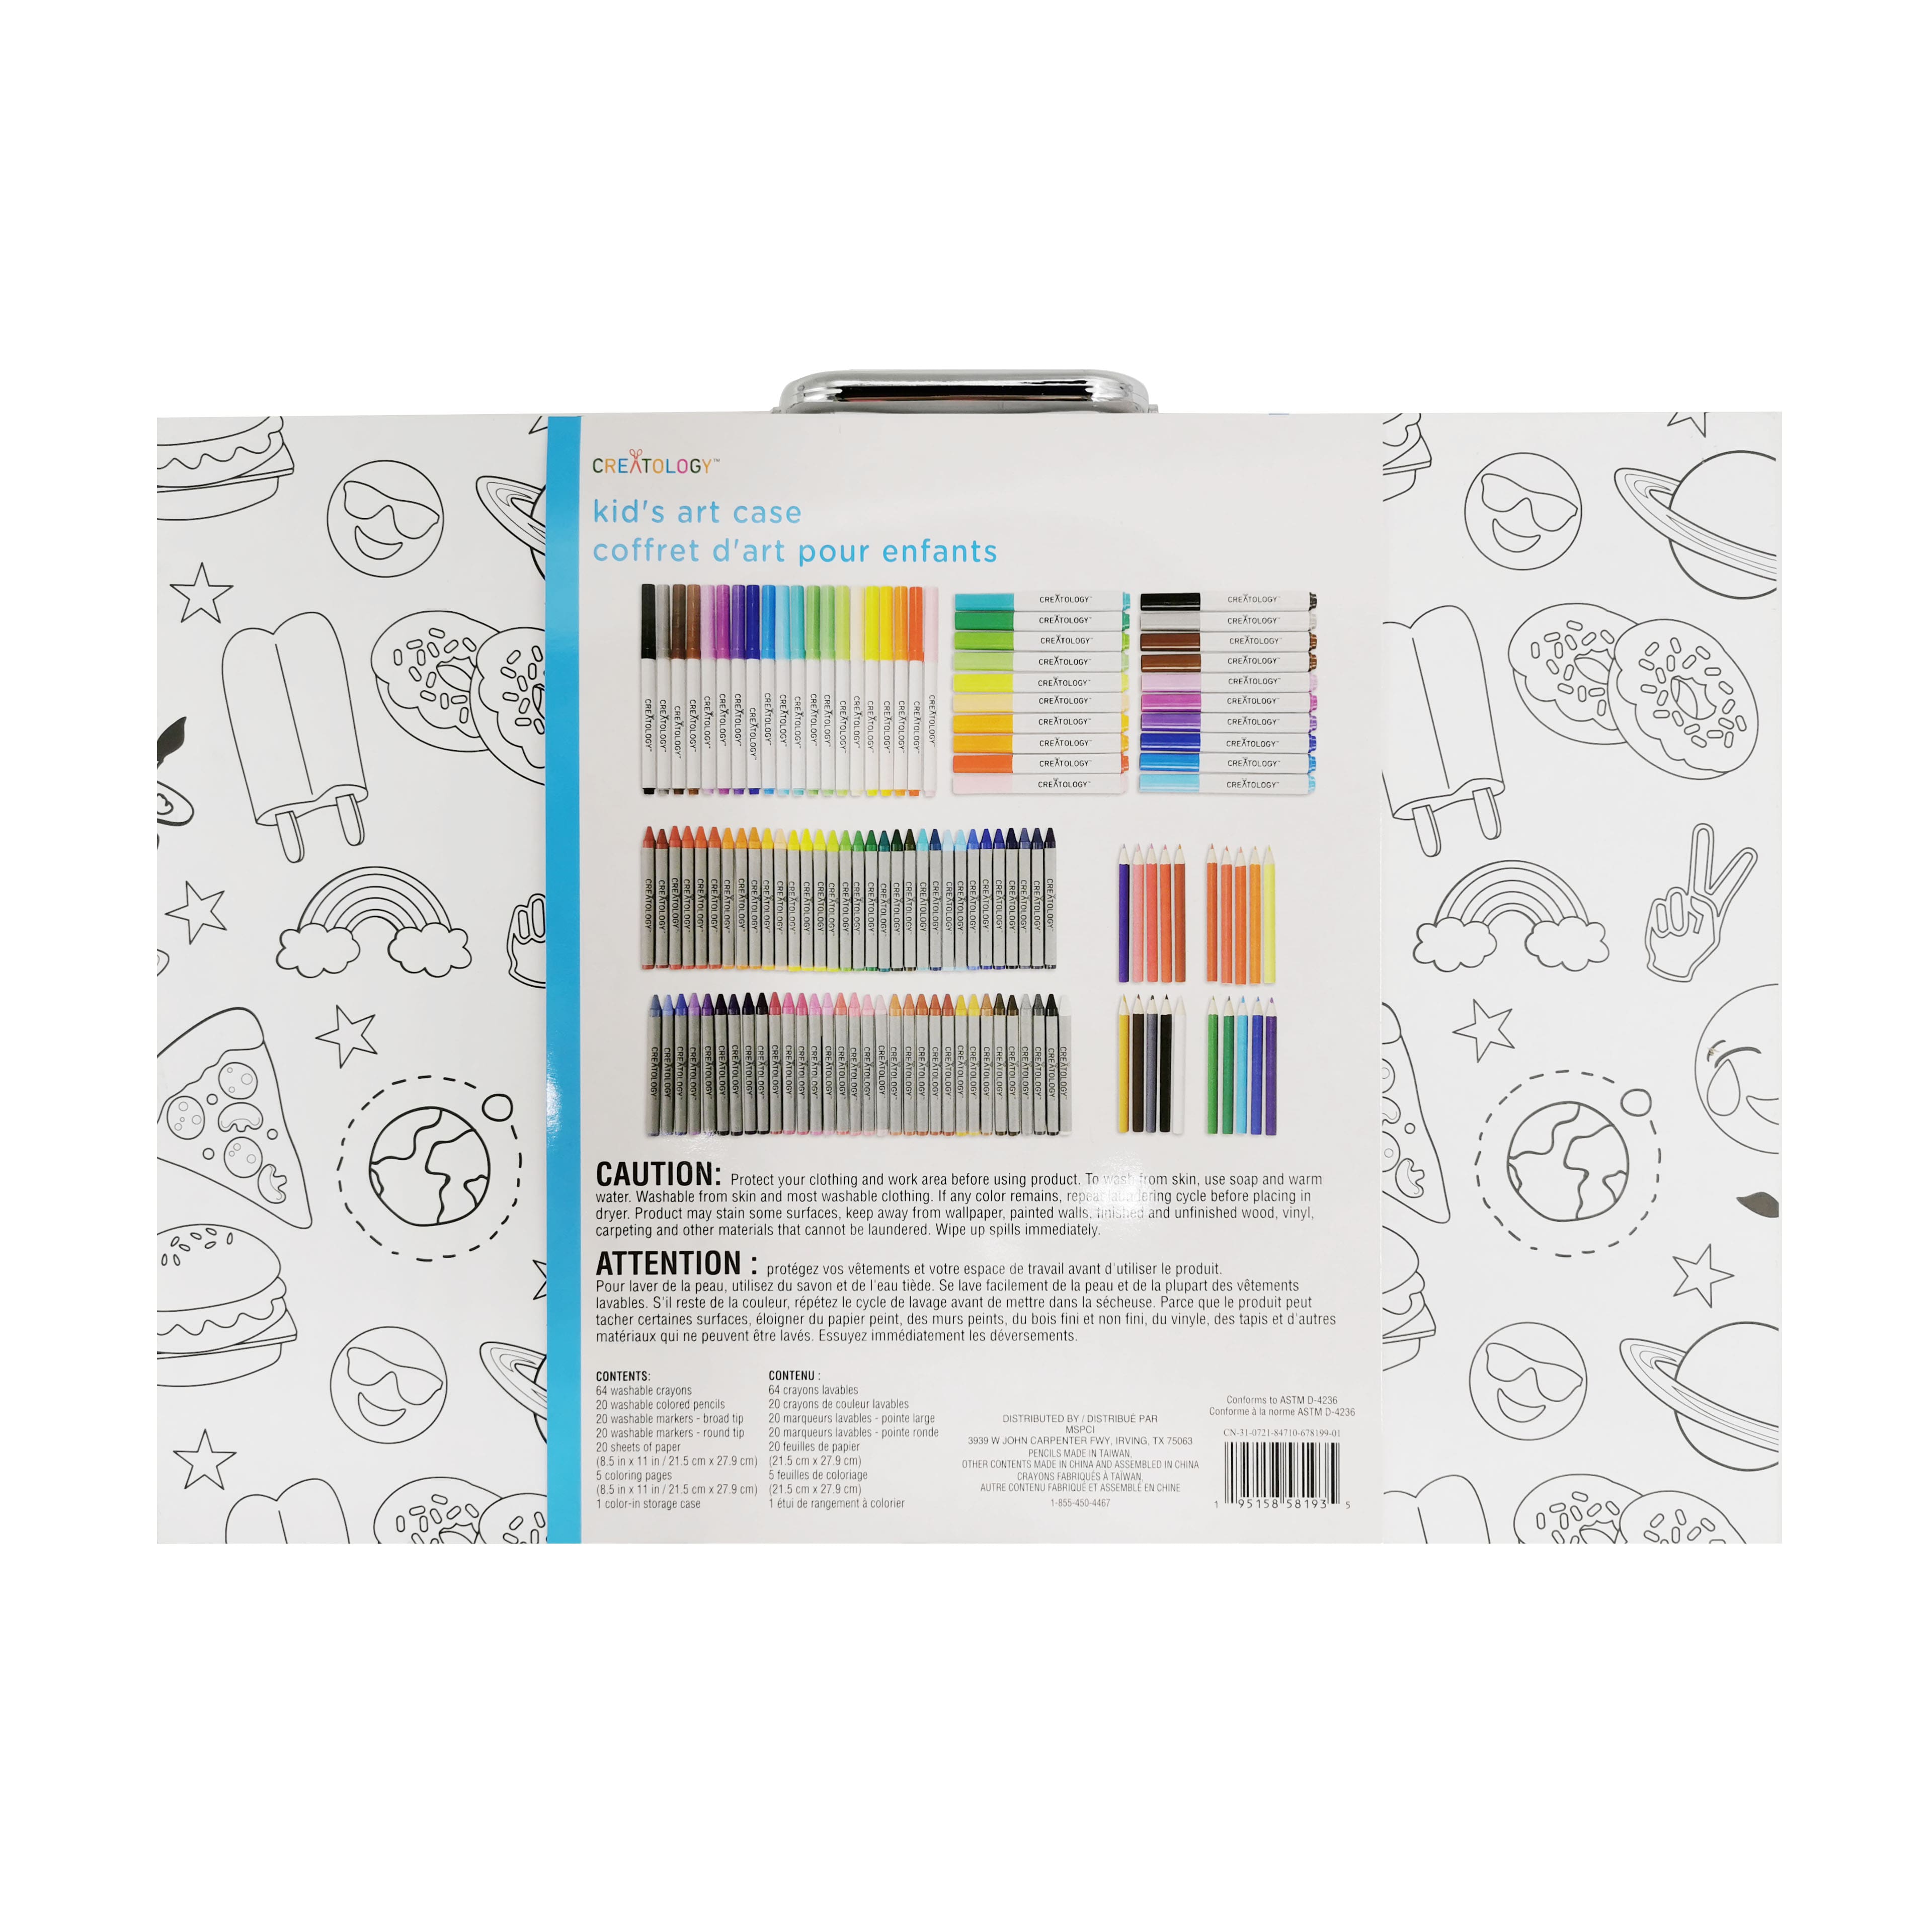 Creatology 100-Piece Art Set Only $1.99 on Michaels.com (Awesome